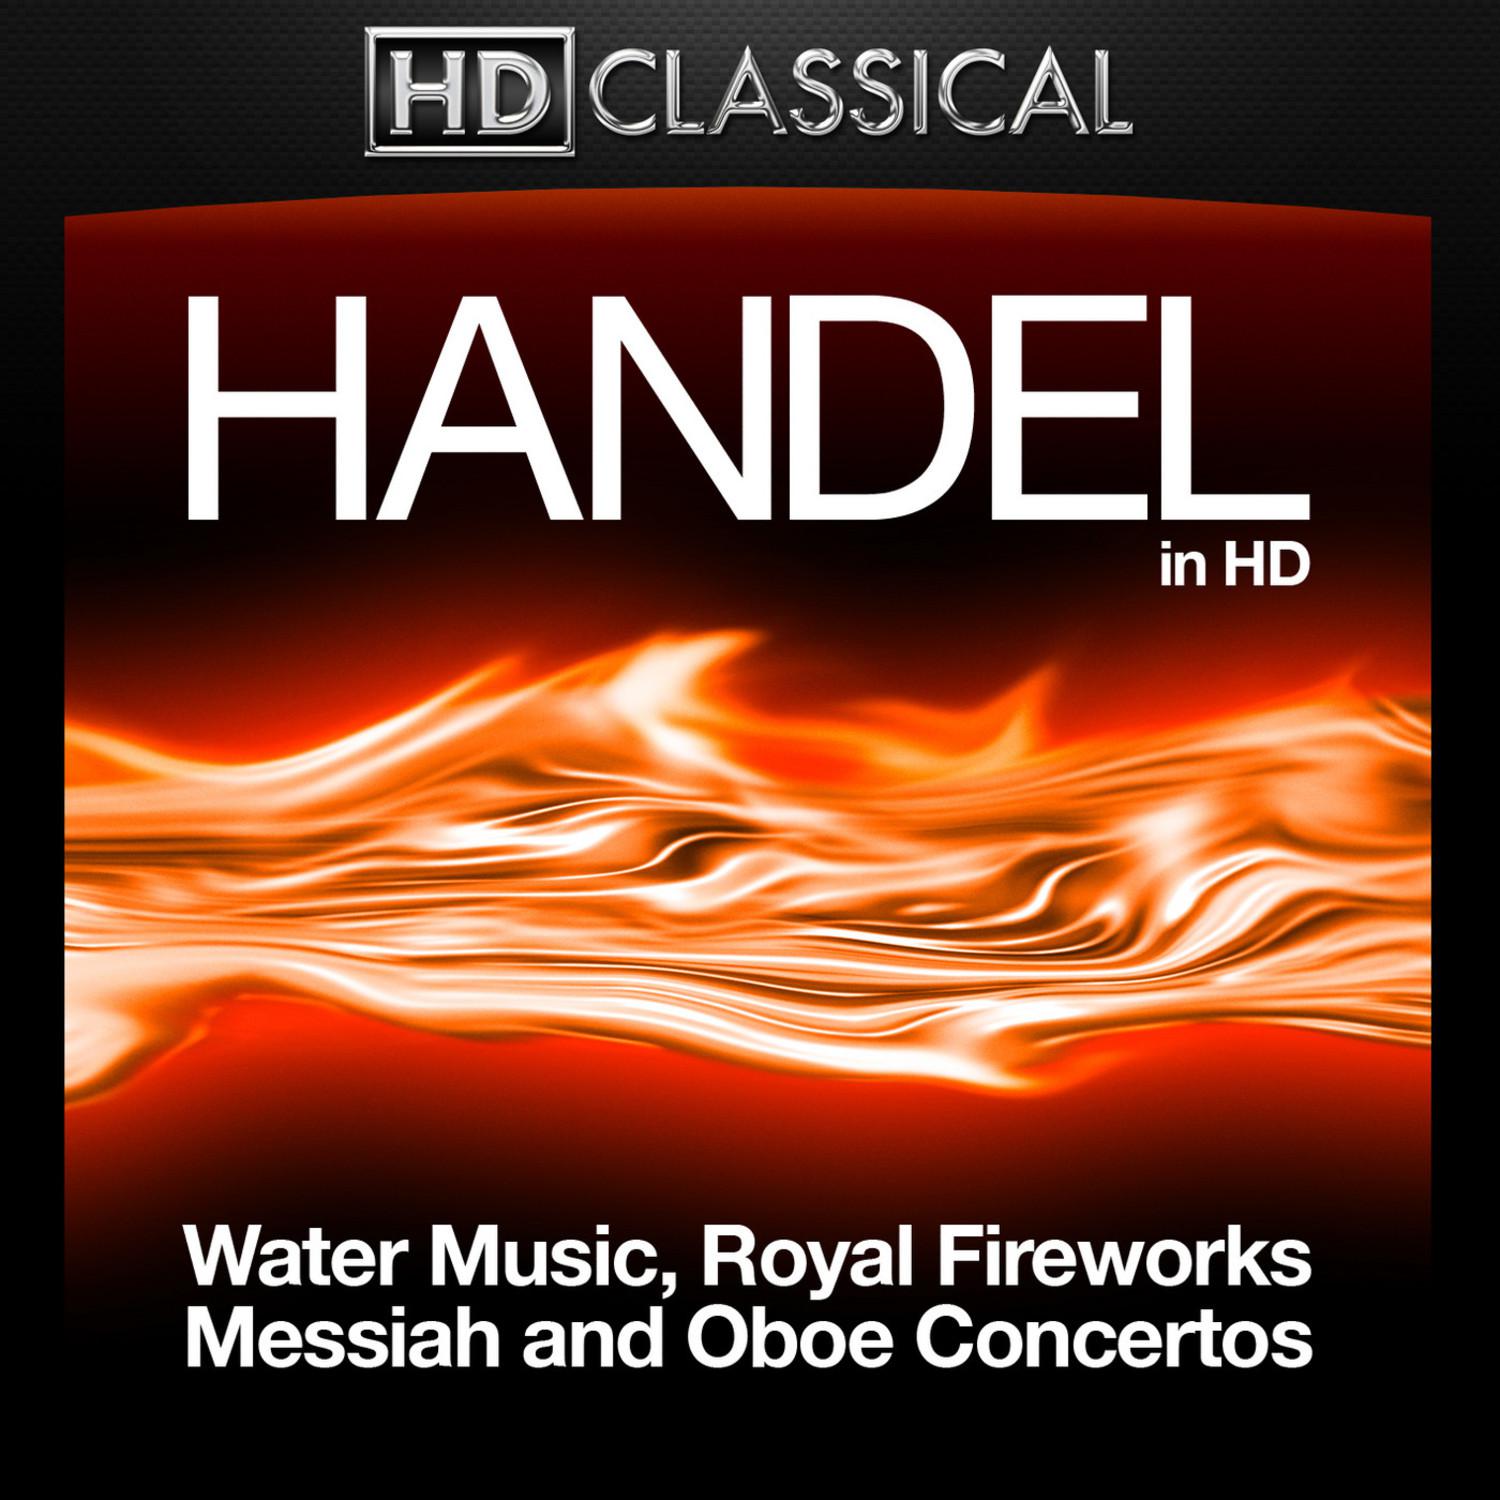 Water Music Suite No. 1 in F Major, HWV 348: VII. Minuet